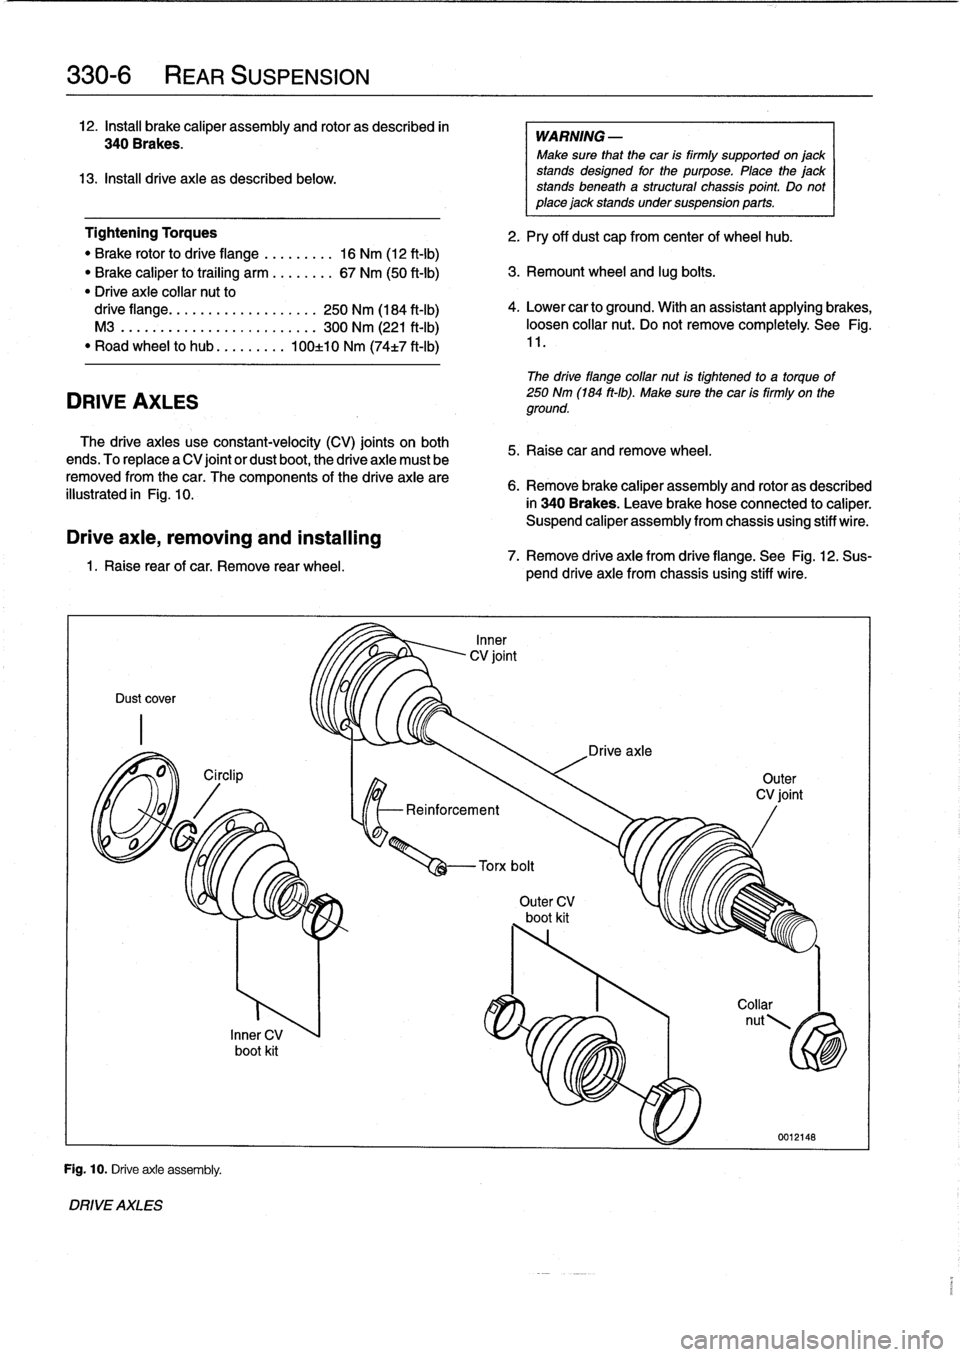 BMW 323i 1995 E36 Owners Manual 
330-
6

	

REAR
SUSPENSION

12
.
Install
brake
caliper
assembly
and
rotor
as
described
in

340Brakes
.

13
.
Install
drive
axie
as
described
below
.

Tightening
Torques

"
Brake
rotor
to
drive
flange